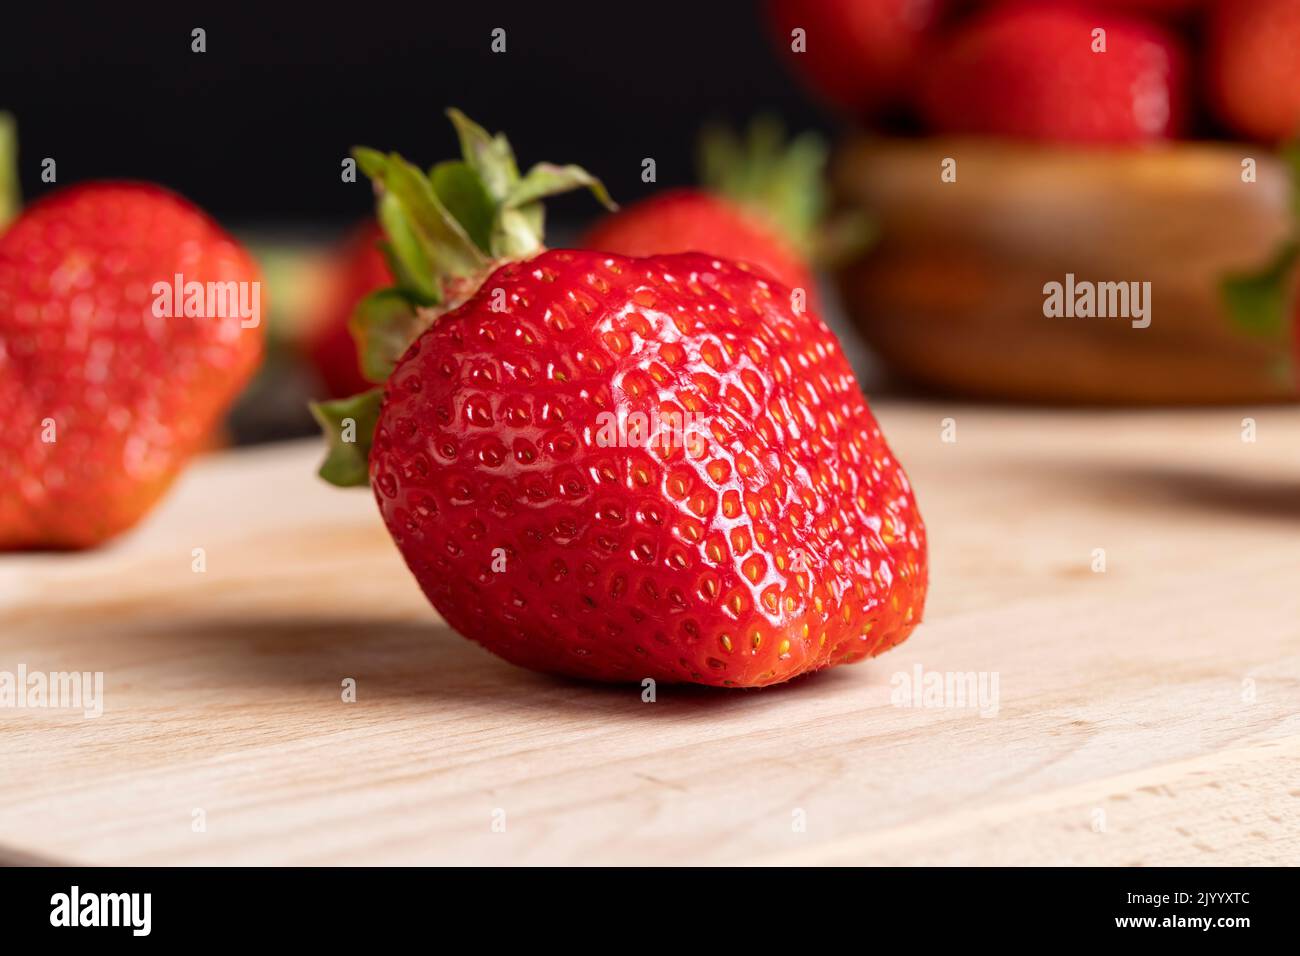 Ripe red strawberries lying on a wooden tray, red strawberries during cooking Stock Photo